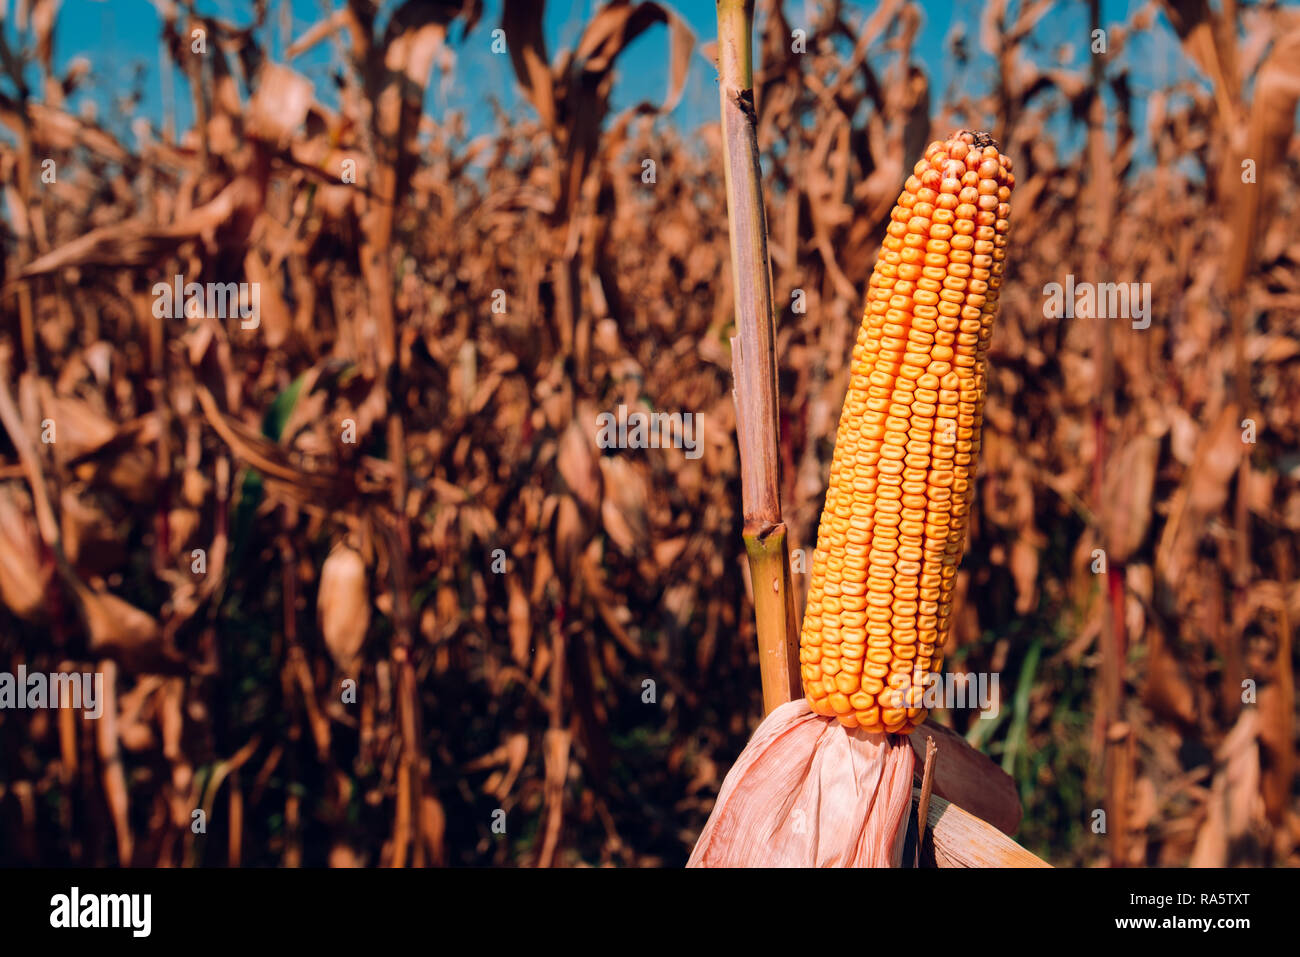 Corn on the cob in cultivated field Stock Photo